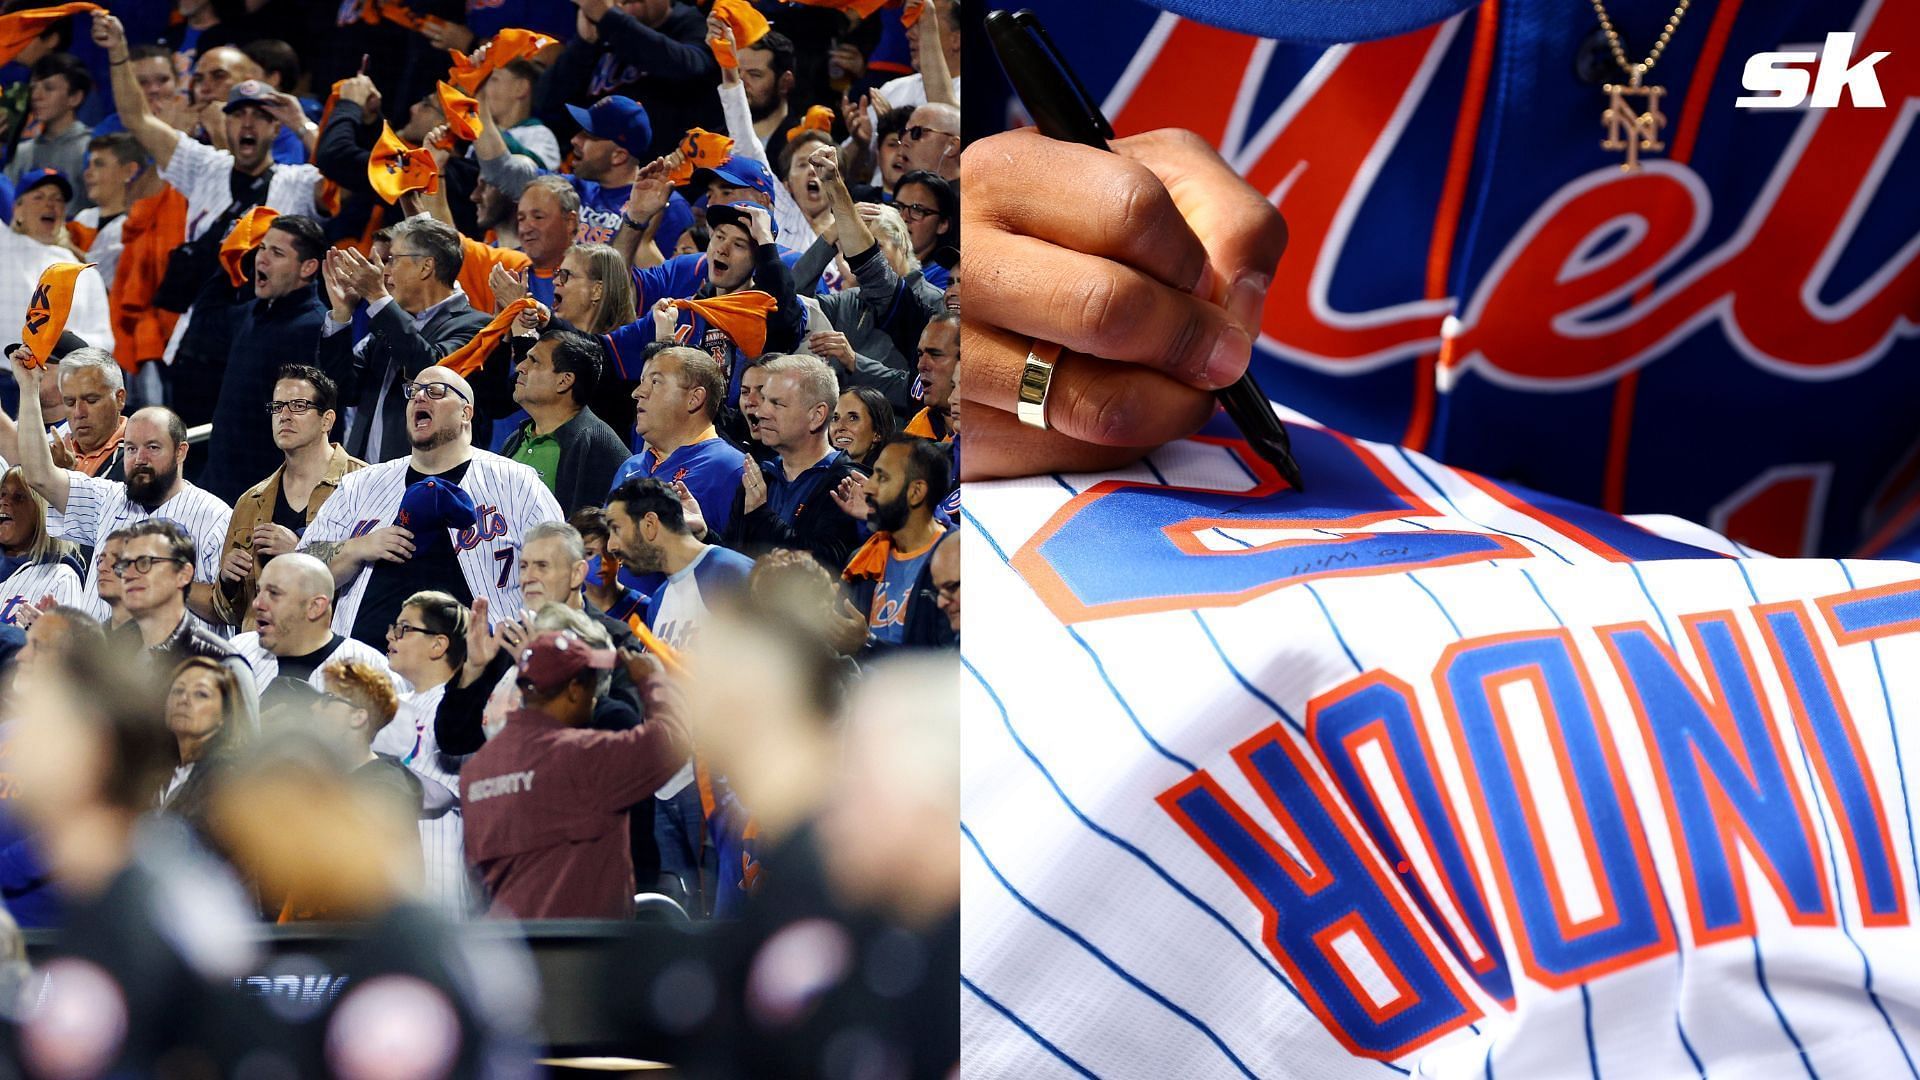 Mets fans are far from thrilled about their team